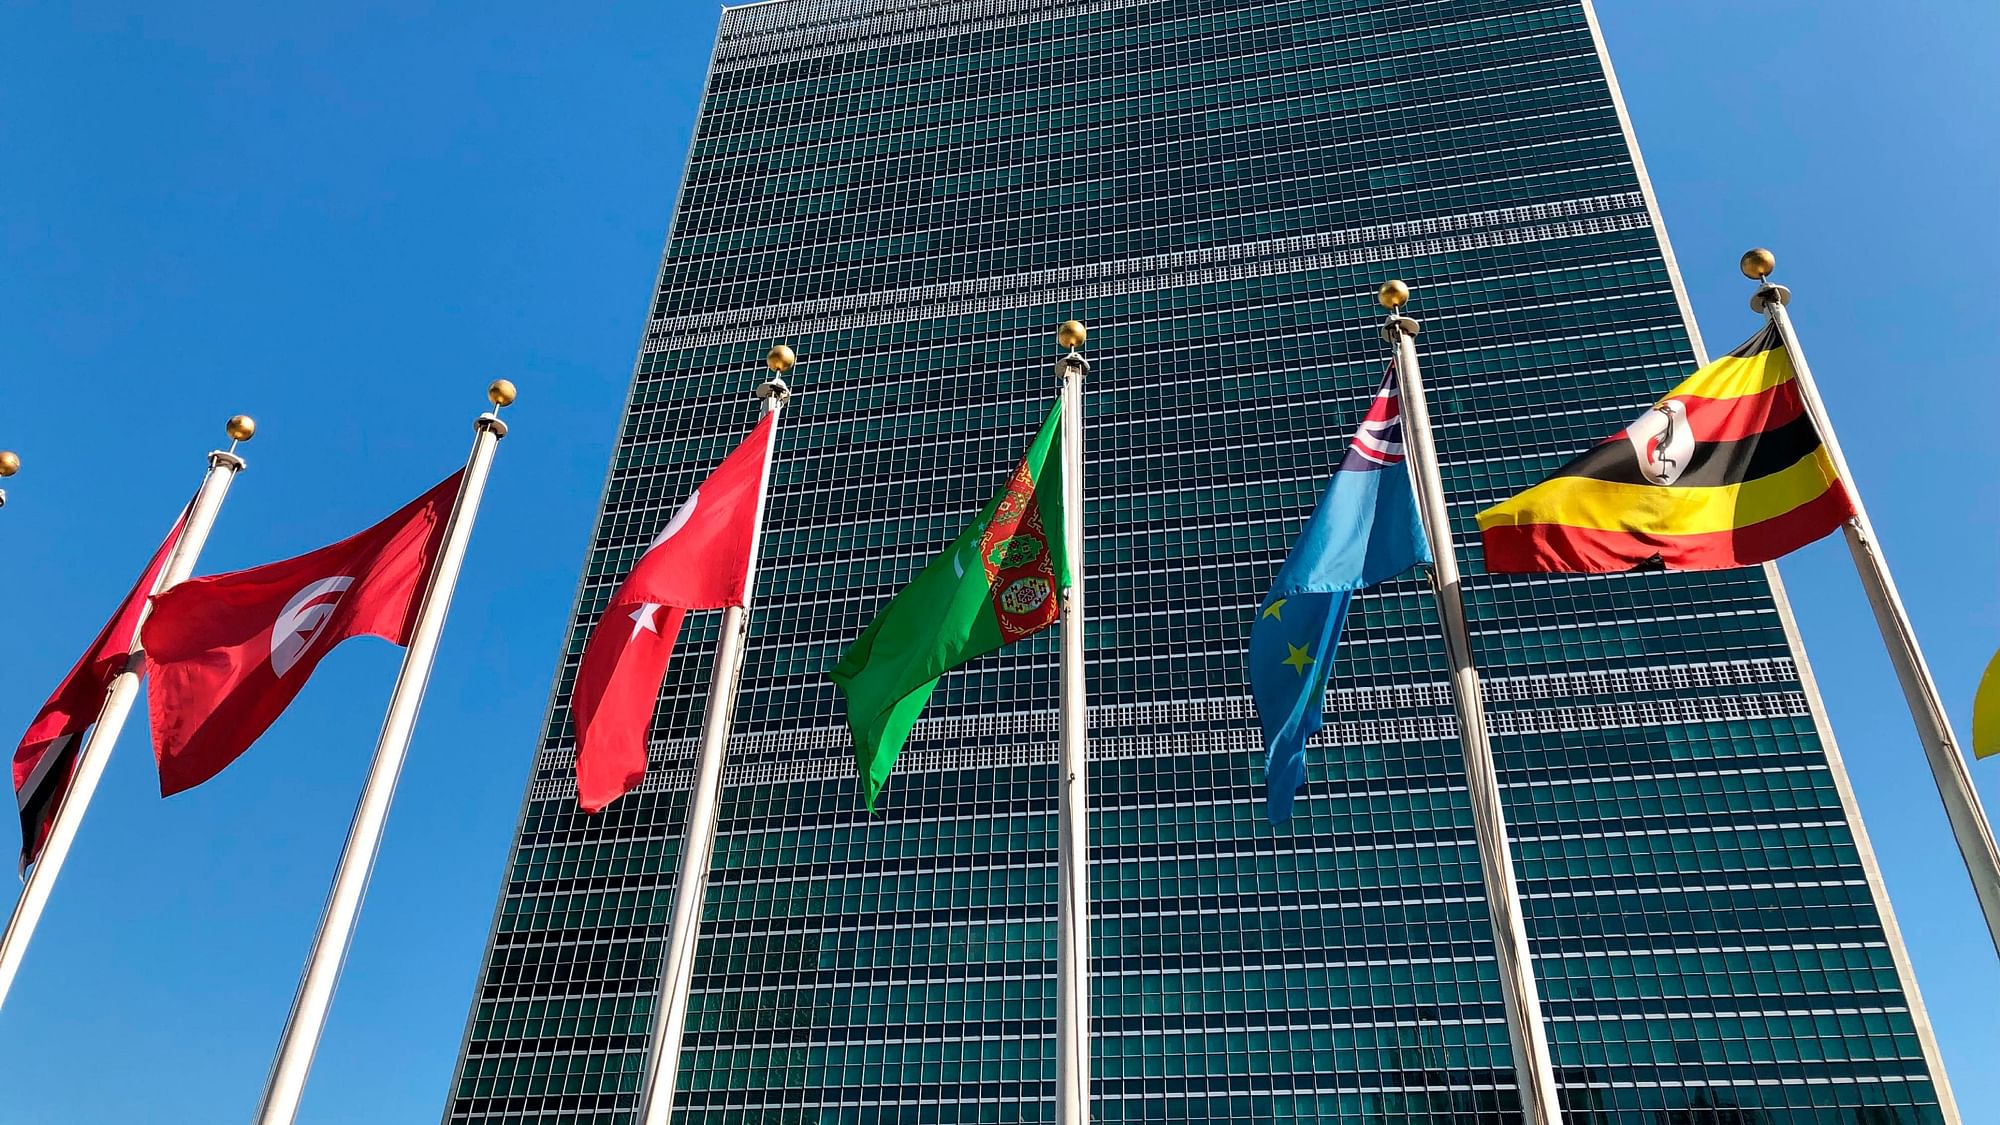 Flags fly outside the UN headquarters during the 74th session of the UNGA on 28 September.